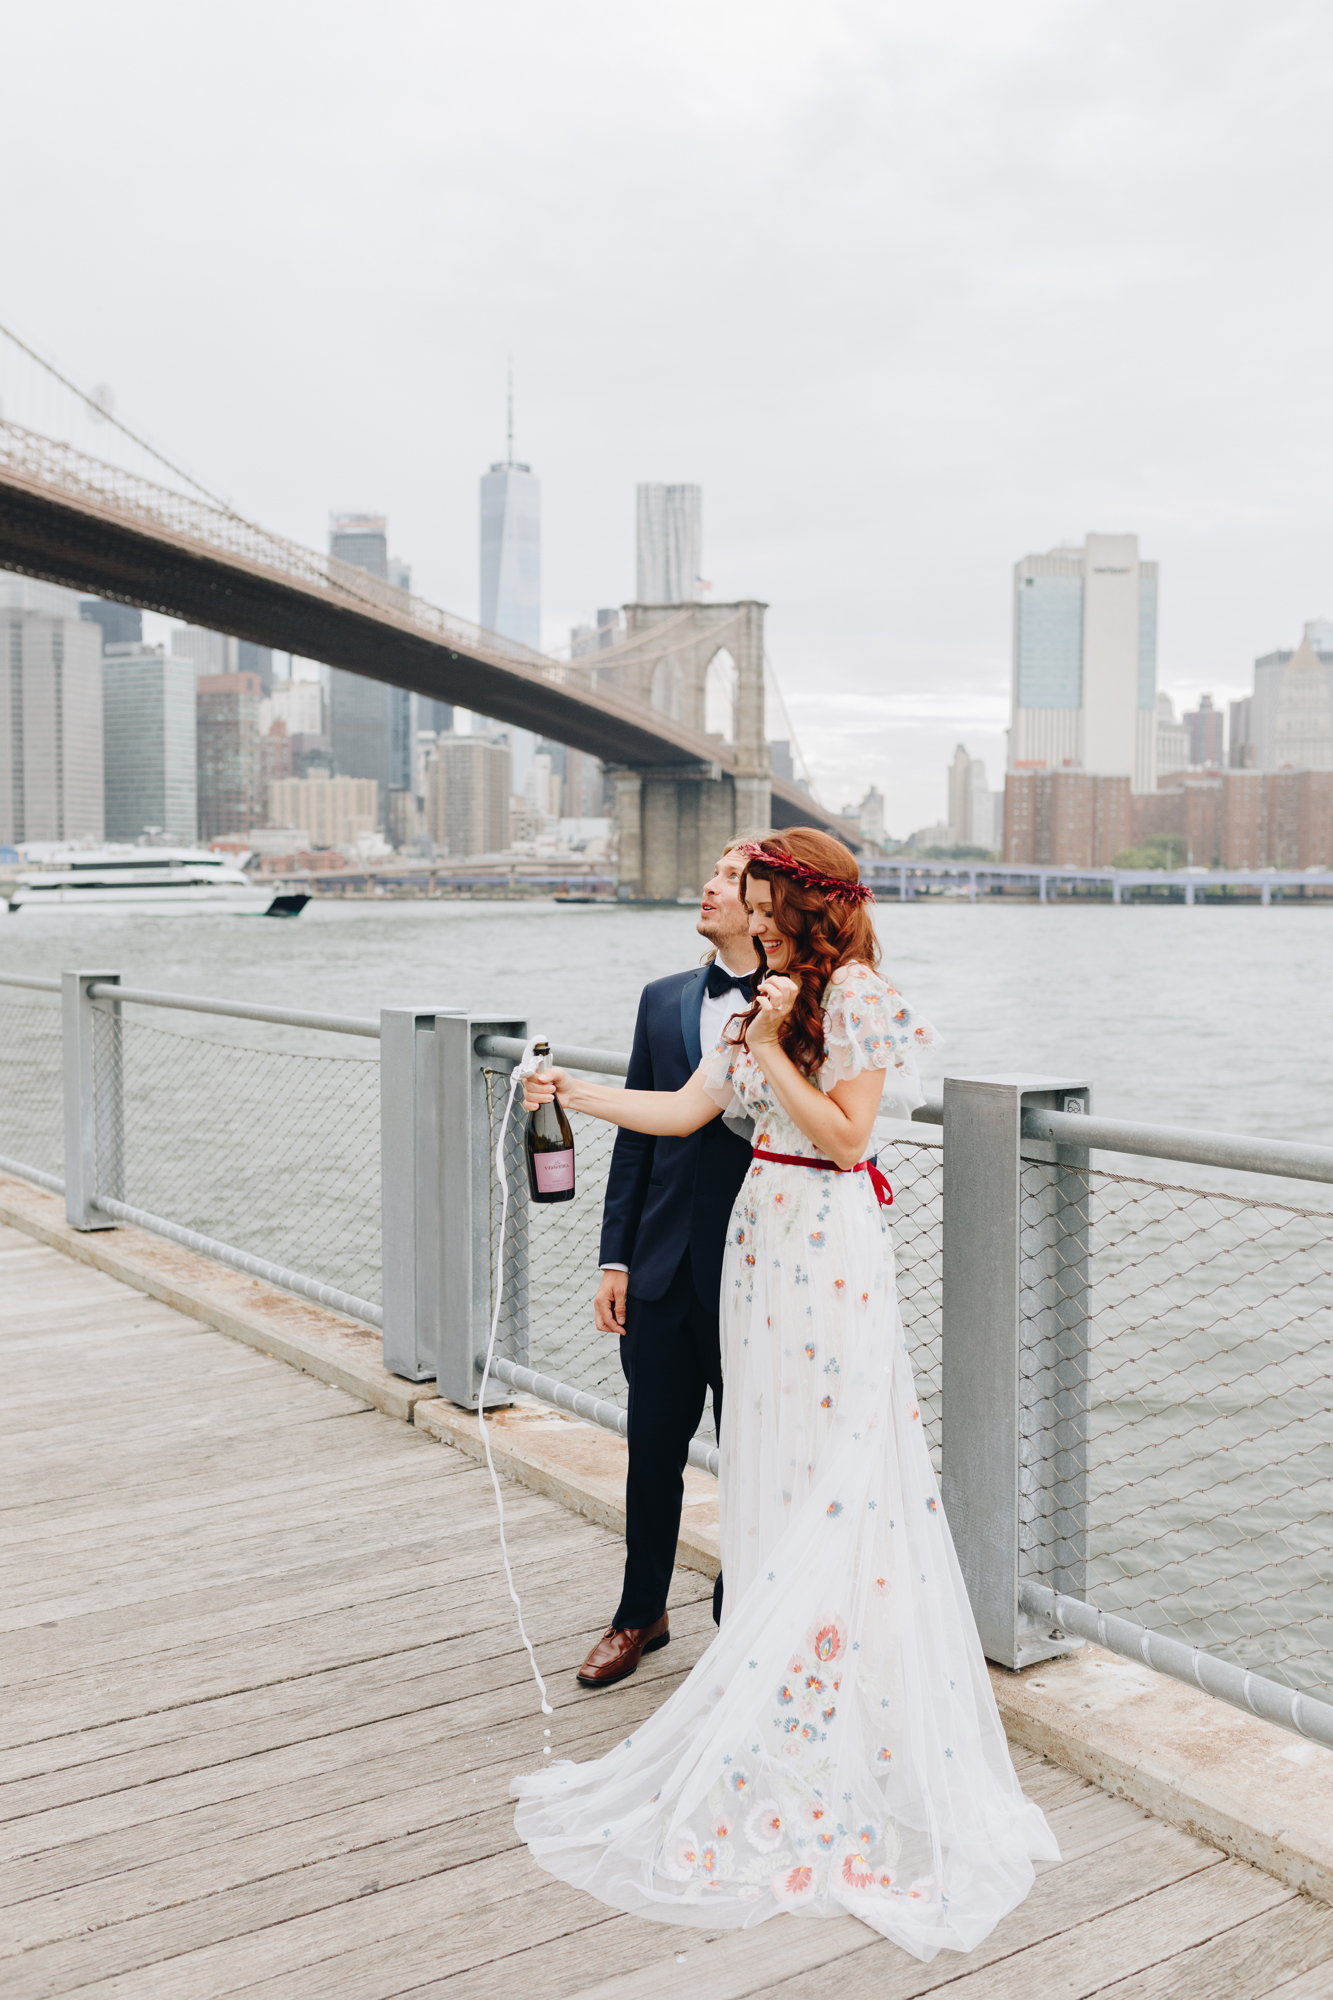 Get married in Dumbo Brooklyn with NYC skyline view